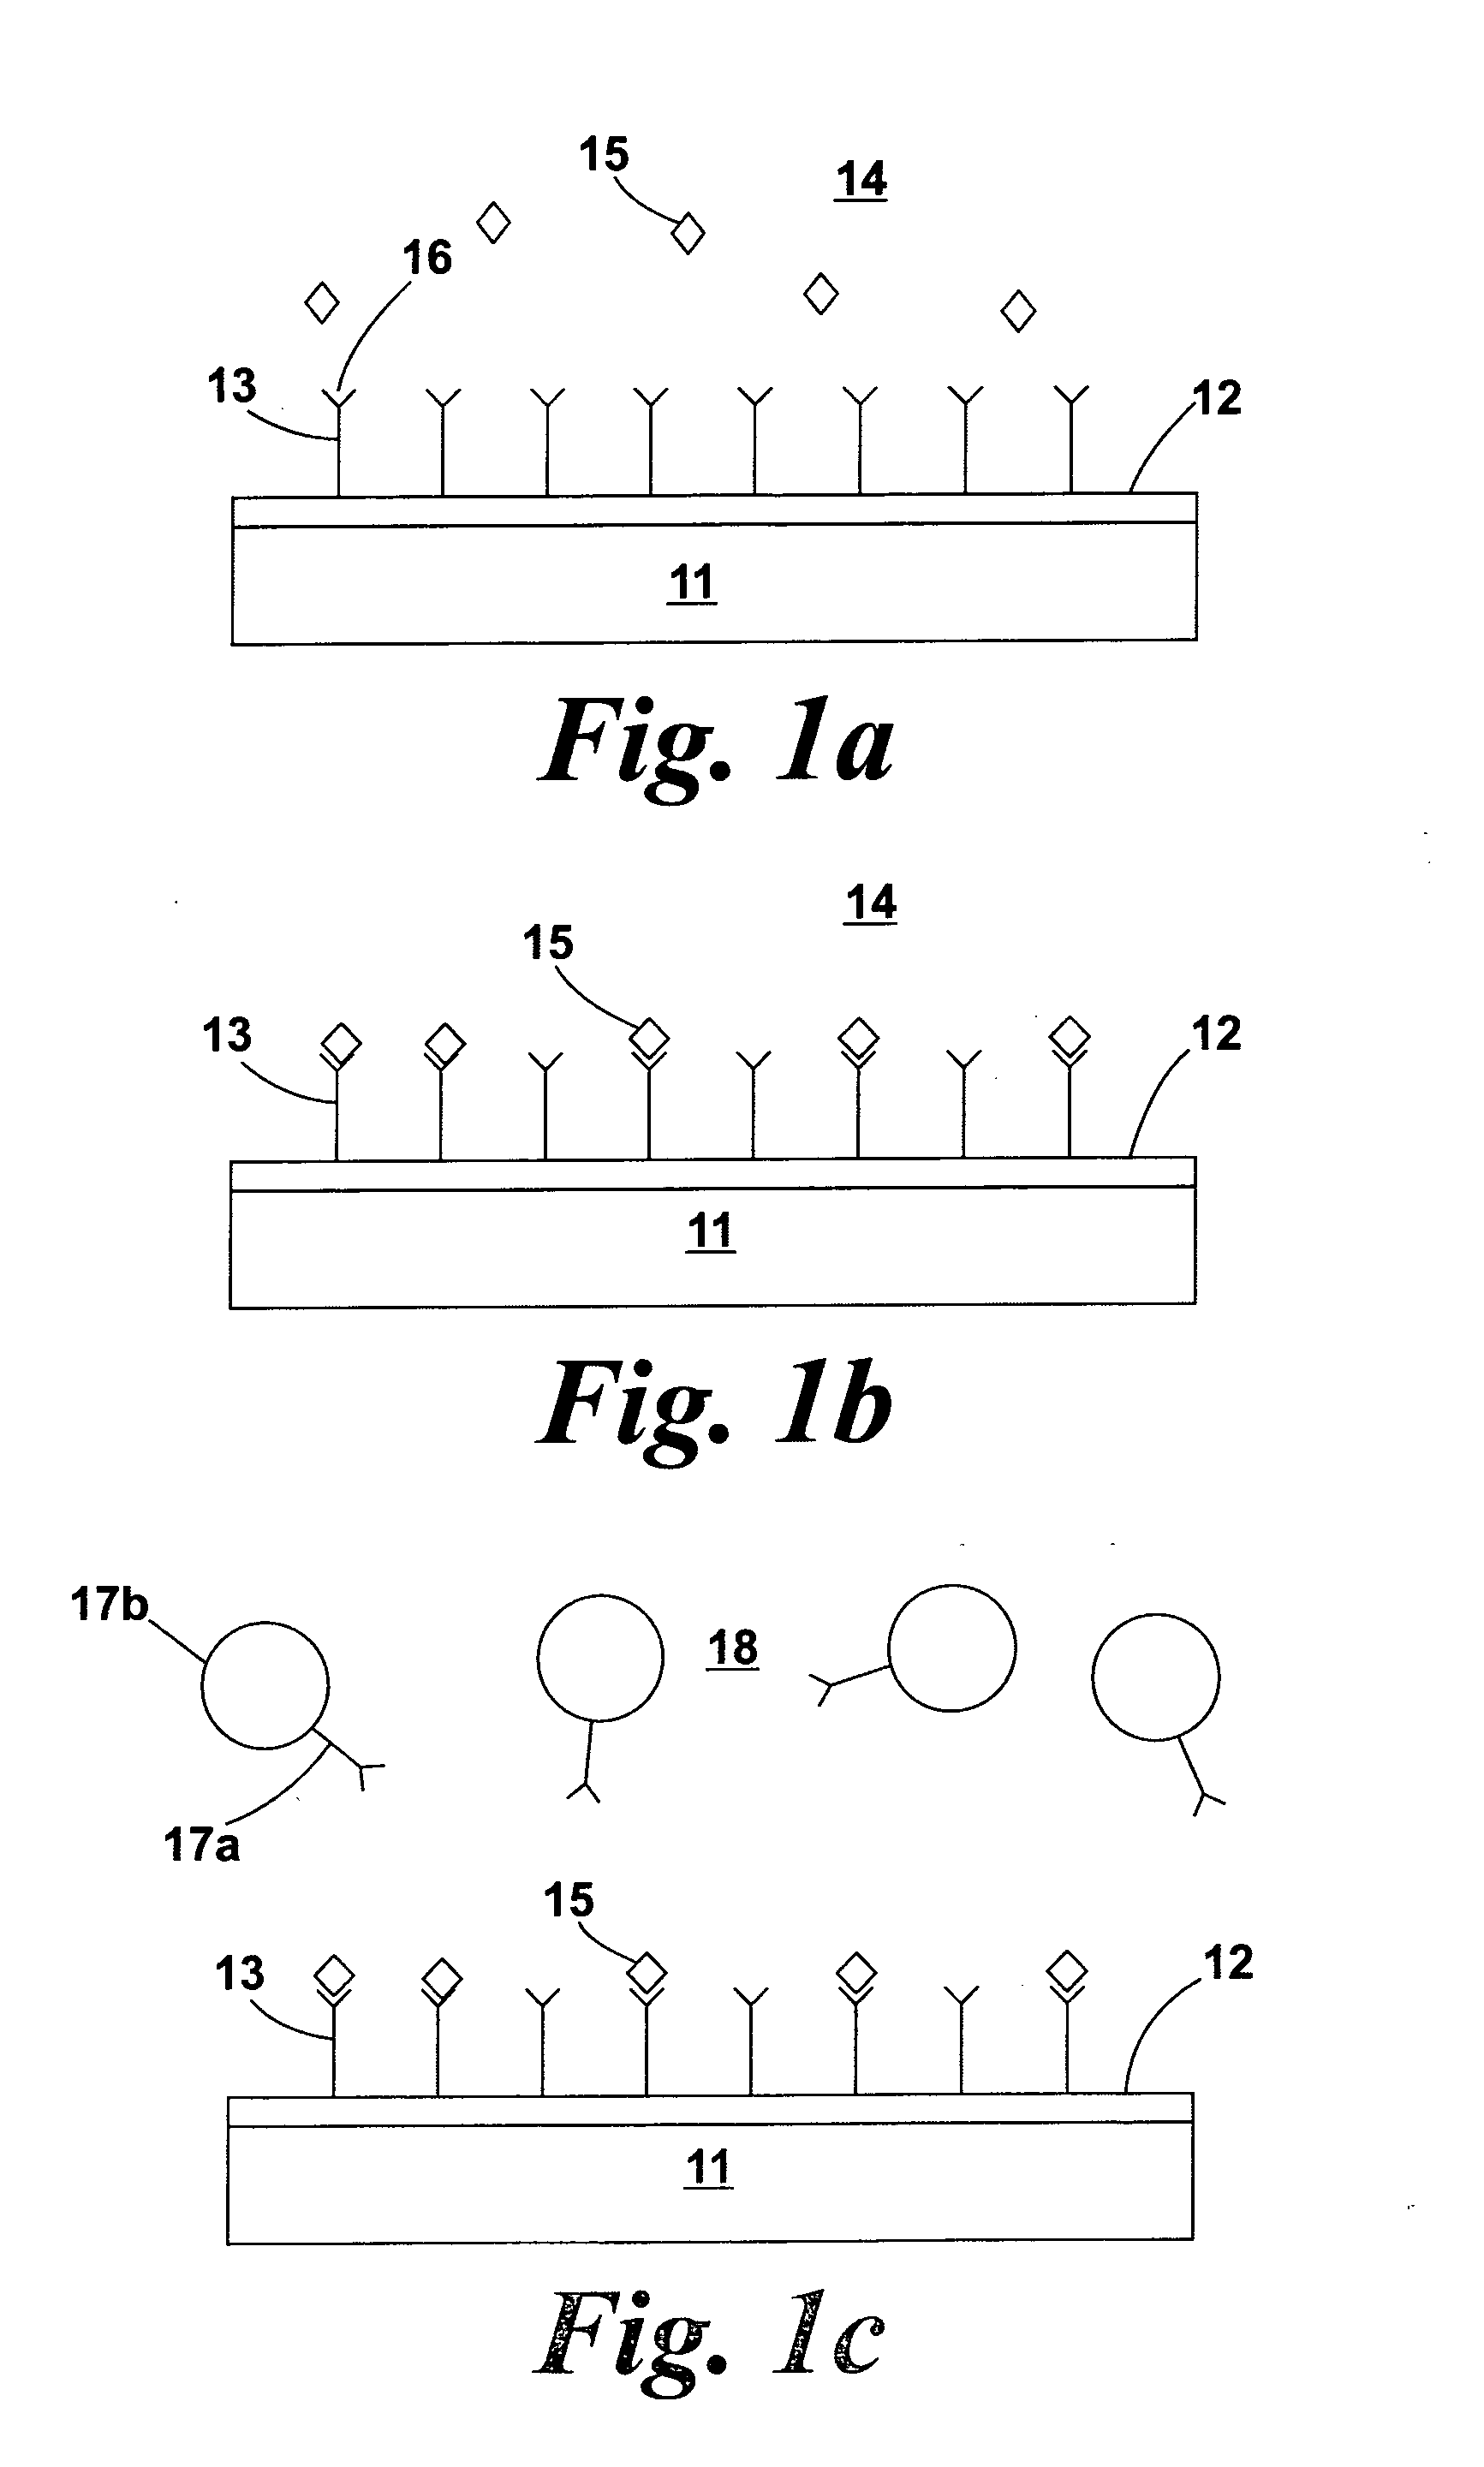 Methods and apparatus for particle detection